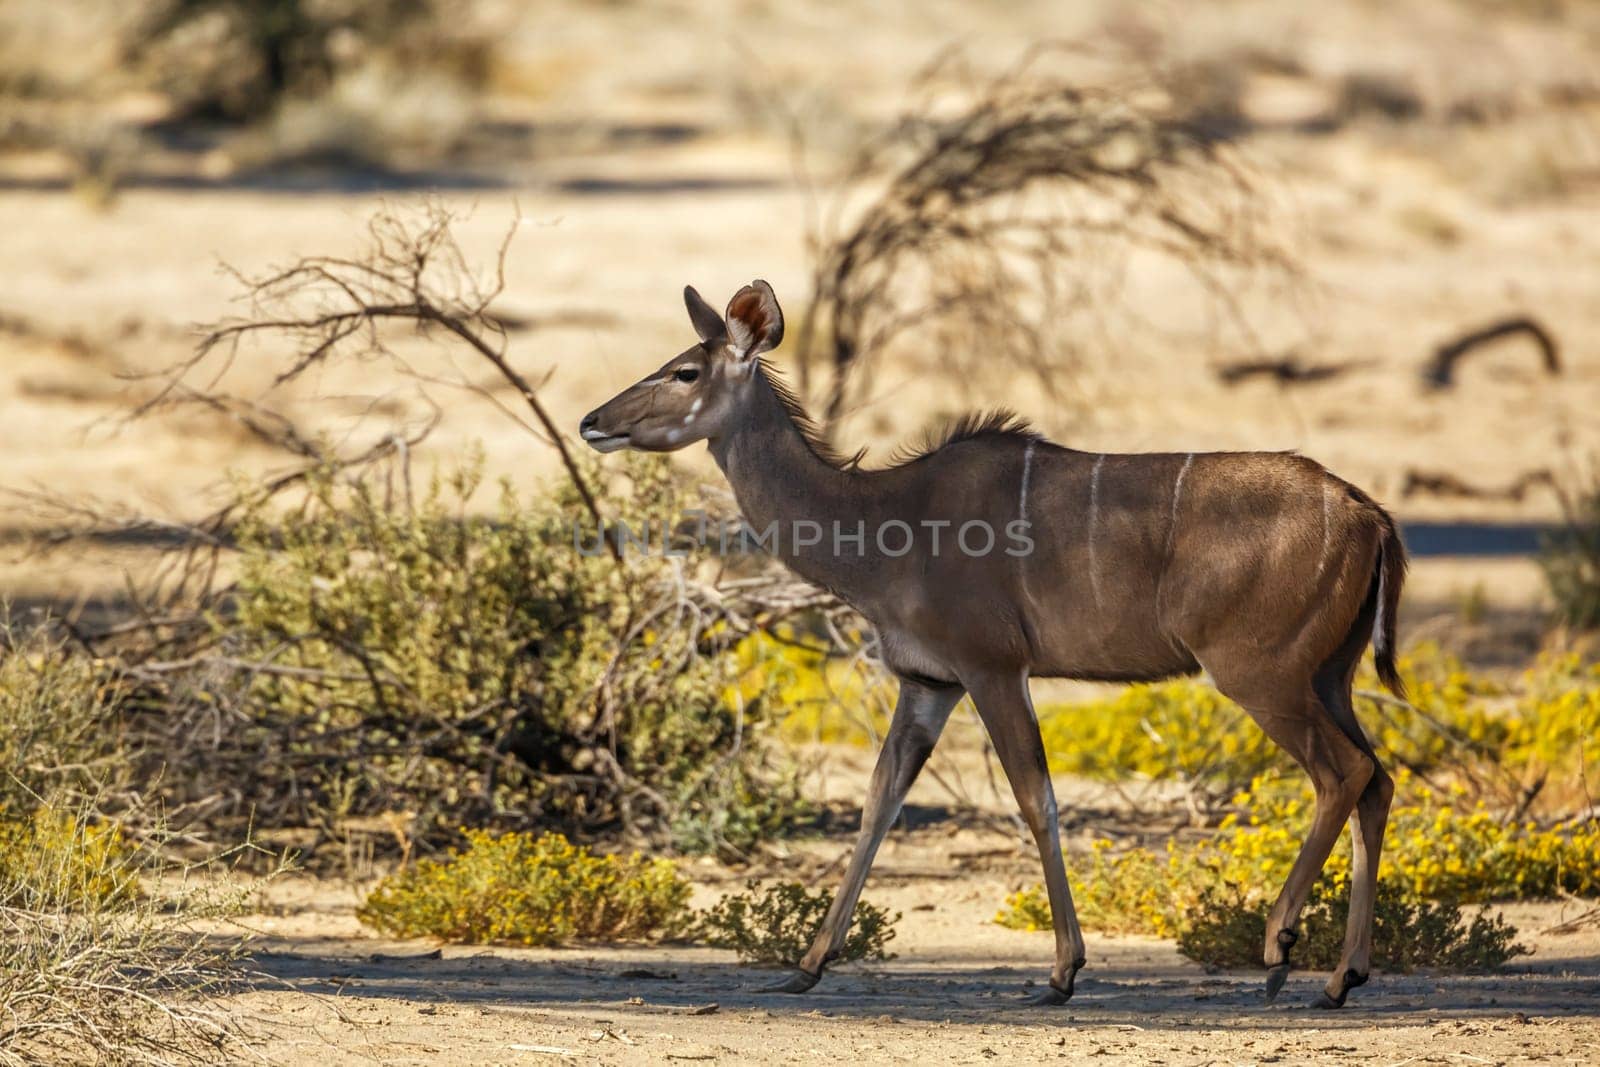 Greater kudu in Kgalagadi transfrontier park, South Africa by PACOCOMO